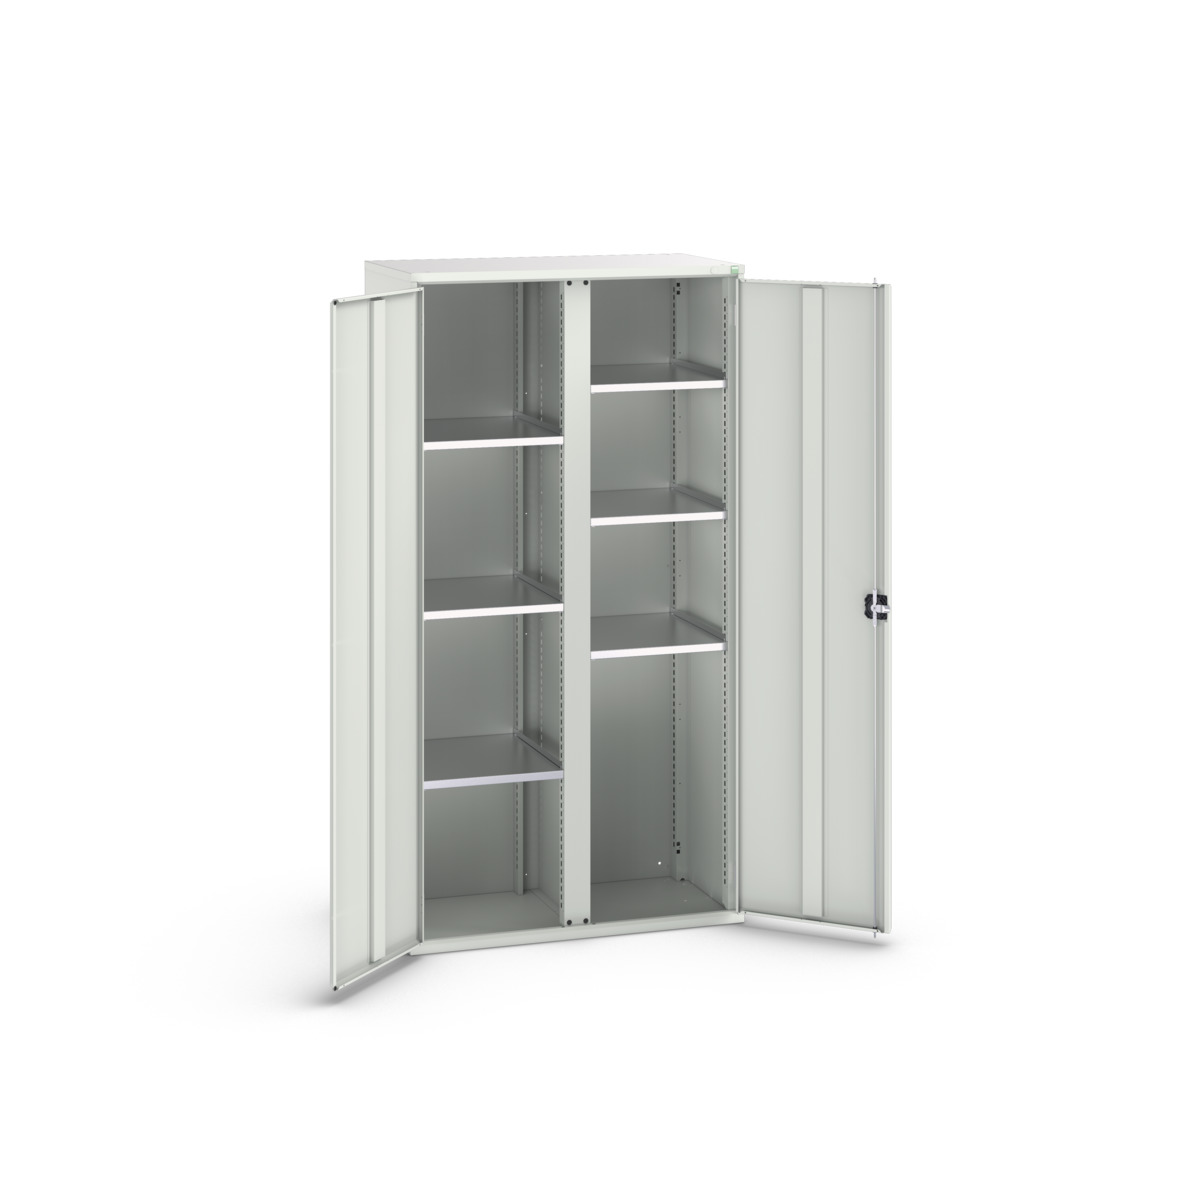 16926580.16 - verso kitted cupboard